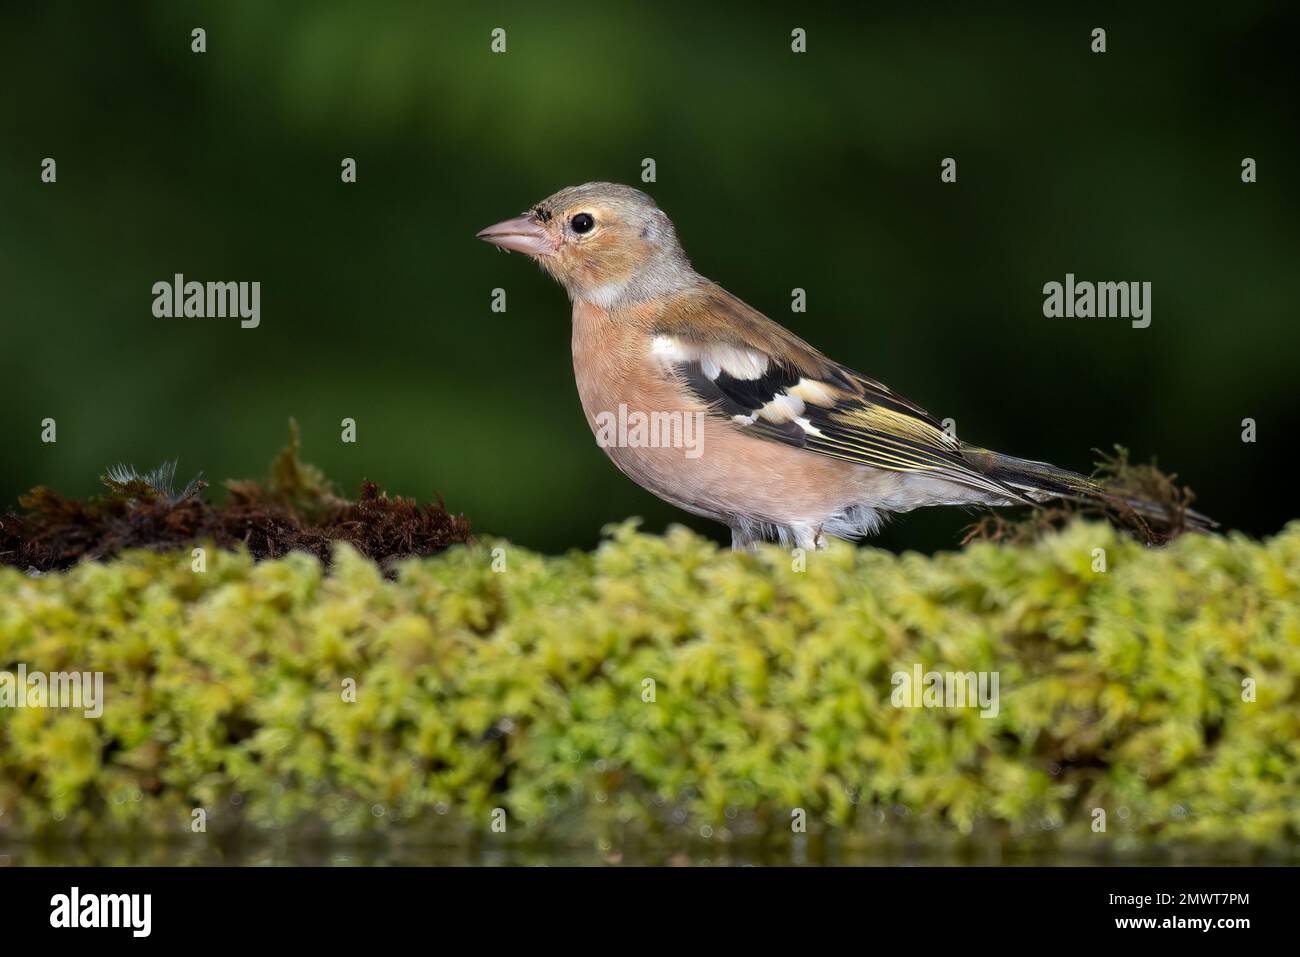 A close up of a male chaffinch as he is standing on vegetation by the side of a pool Stock Photo